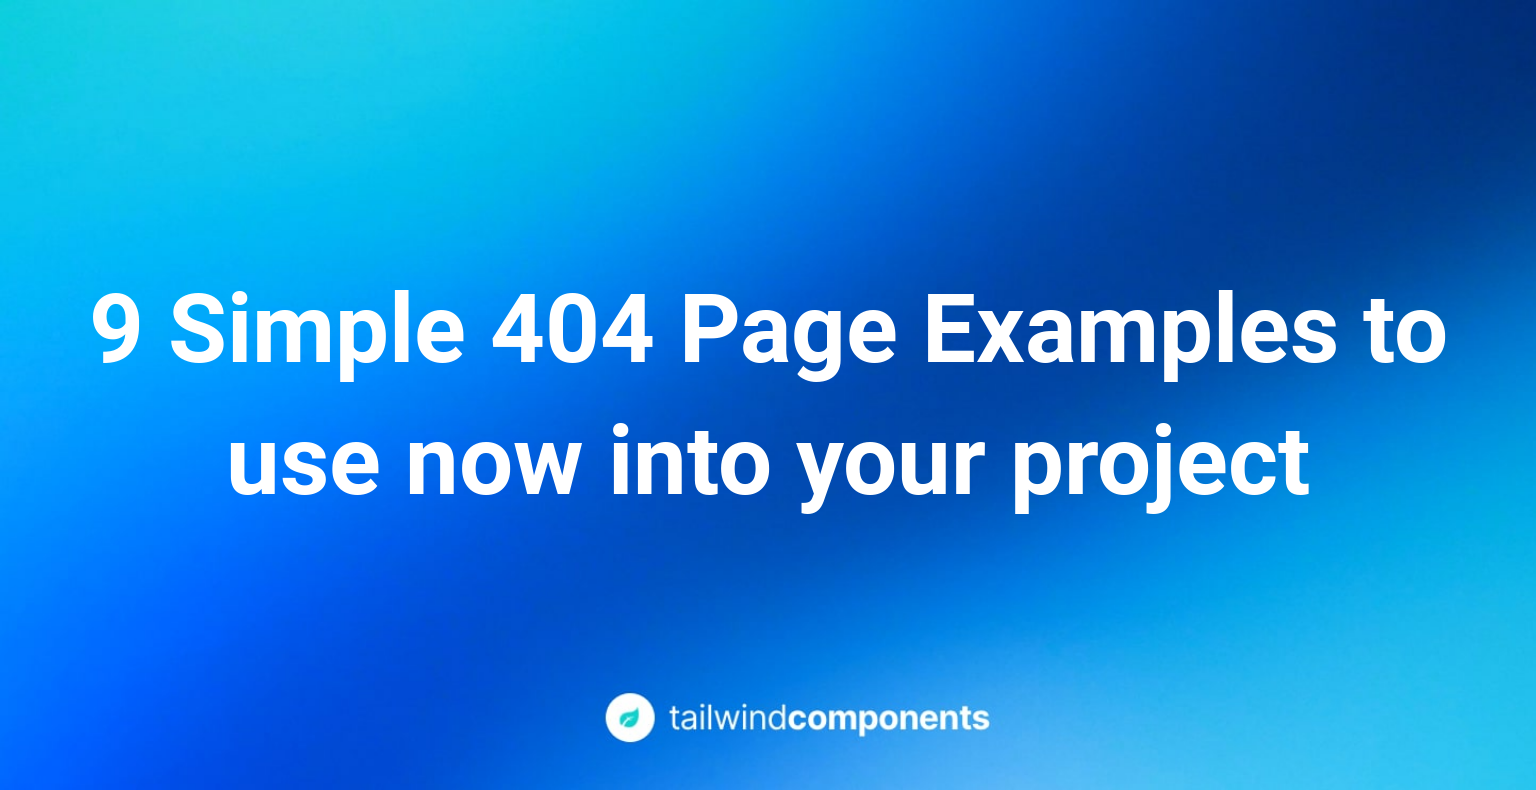 9 Simple 404 Page Examples to use now into your project